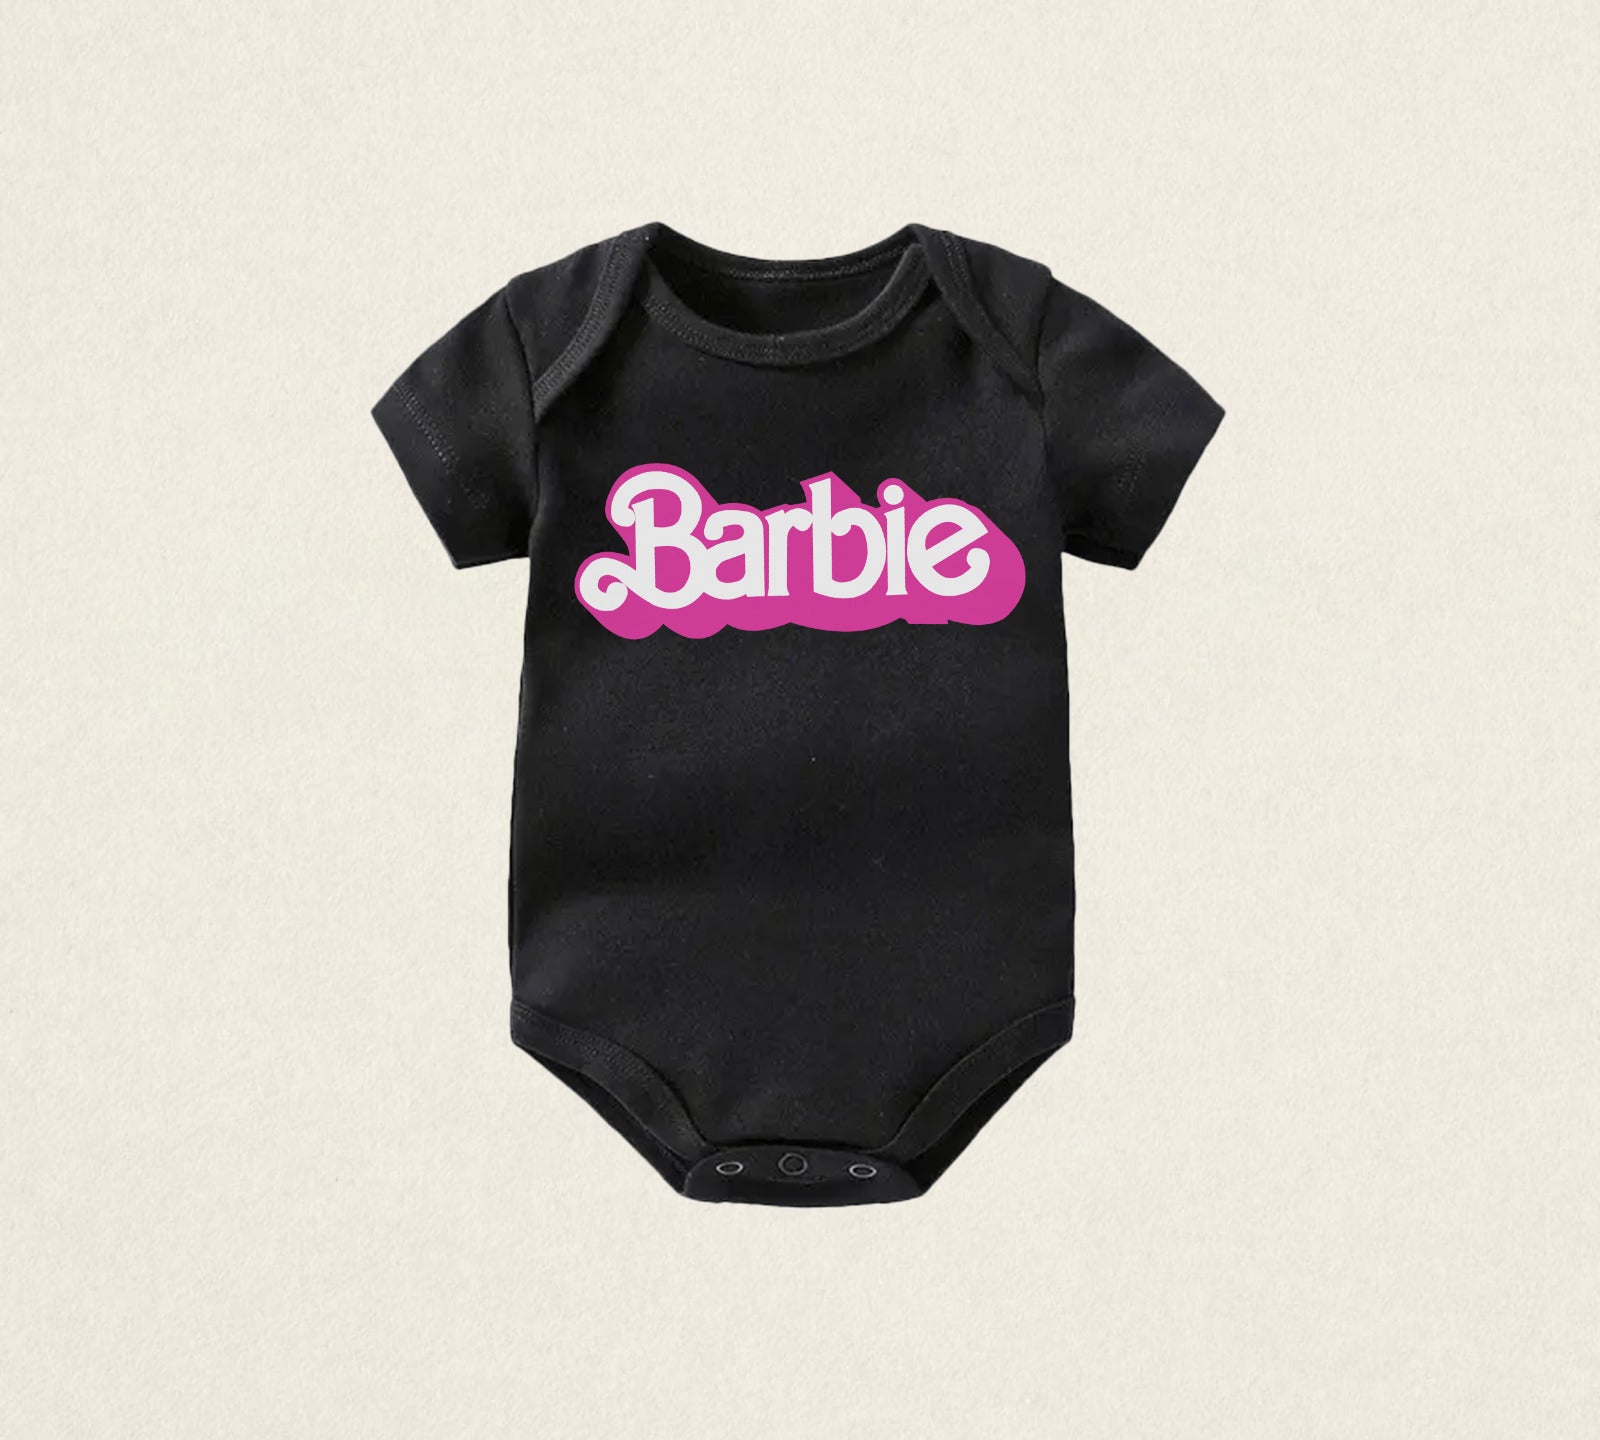 Cute Barbie Movie-Inspired Baby Bodysuit - Adorable & Comfy Attire for  Little Fashionistas! Limited Edition - Click to Dress Your Baby in Style! –  LIAMAORYX